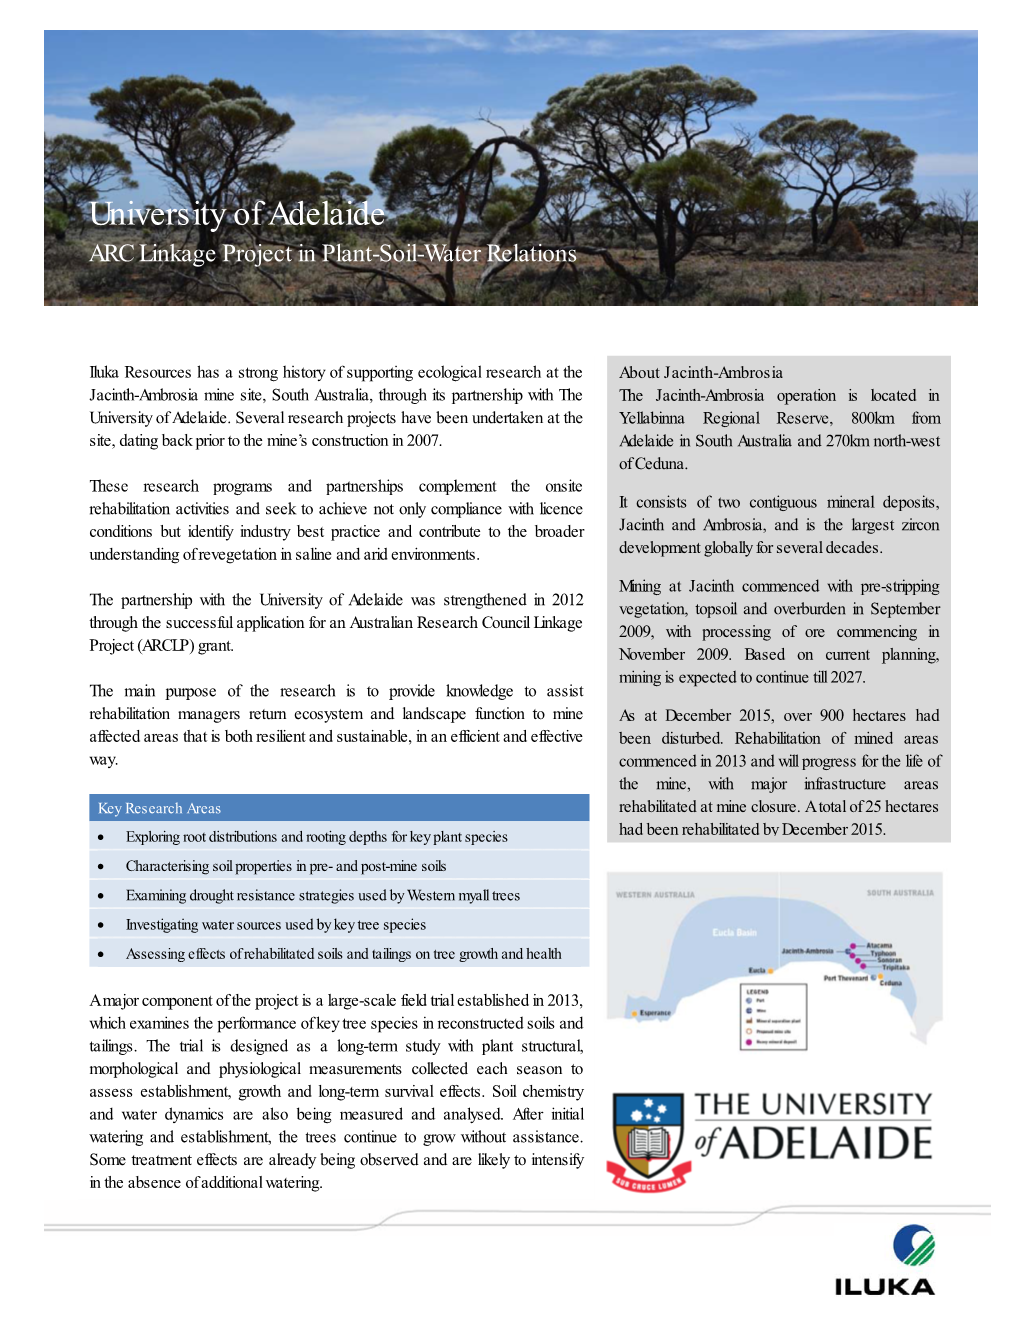 University of Adelaide ARC Linkage Project in Plant-Soil-Water Relations